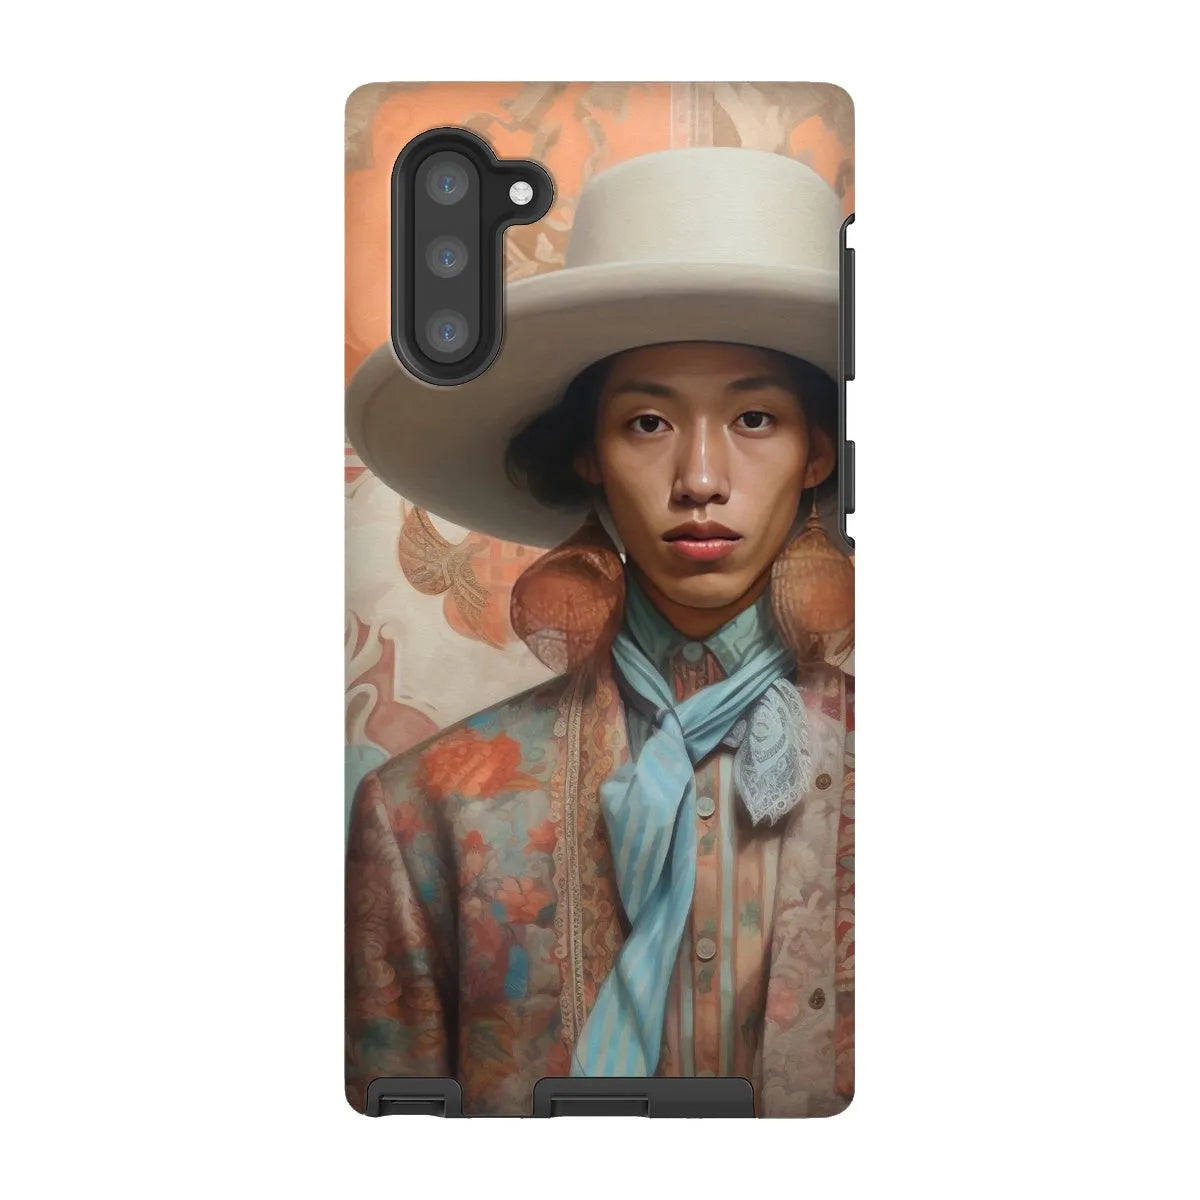 Iyaan The Gay Cowboy - Dandy Gay Aesthetic Art Phone Case - Samsung Galaxy Note 10 / Matte - Mobile Phone Cases